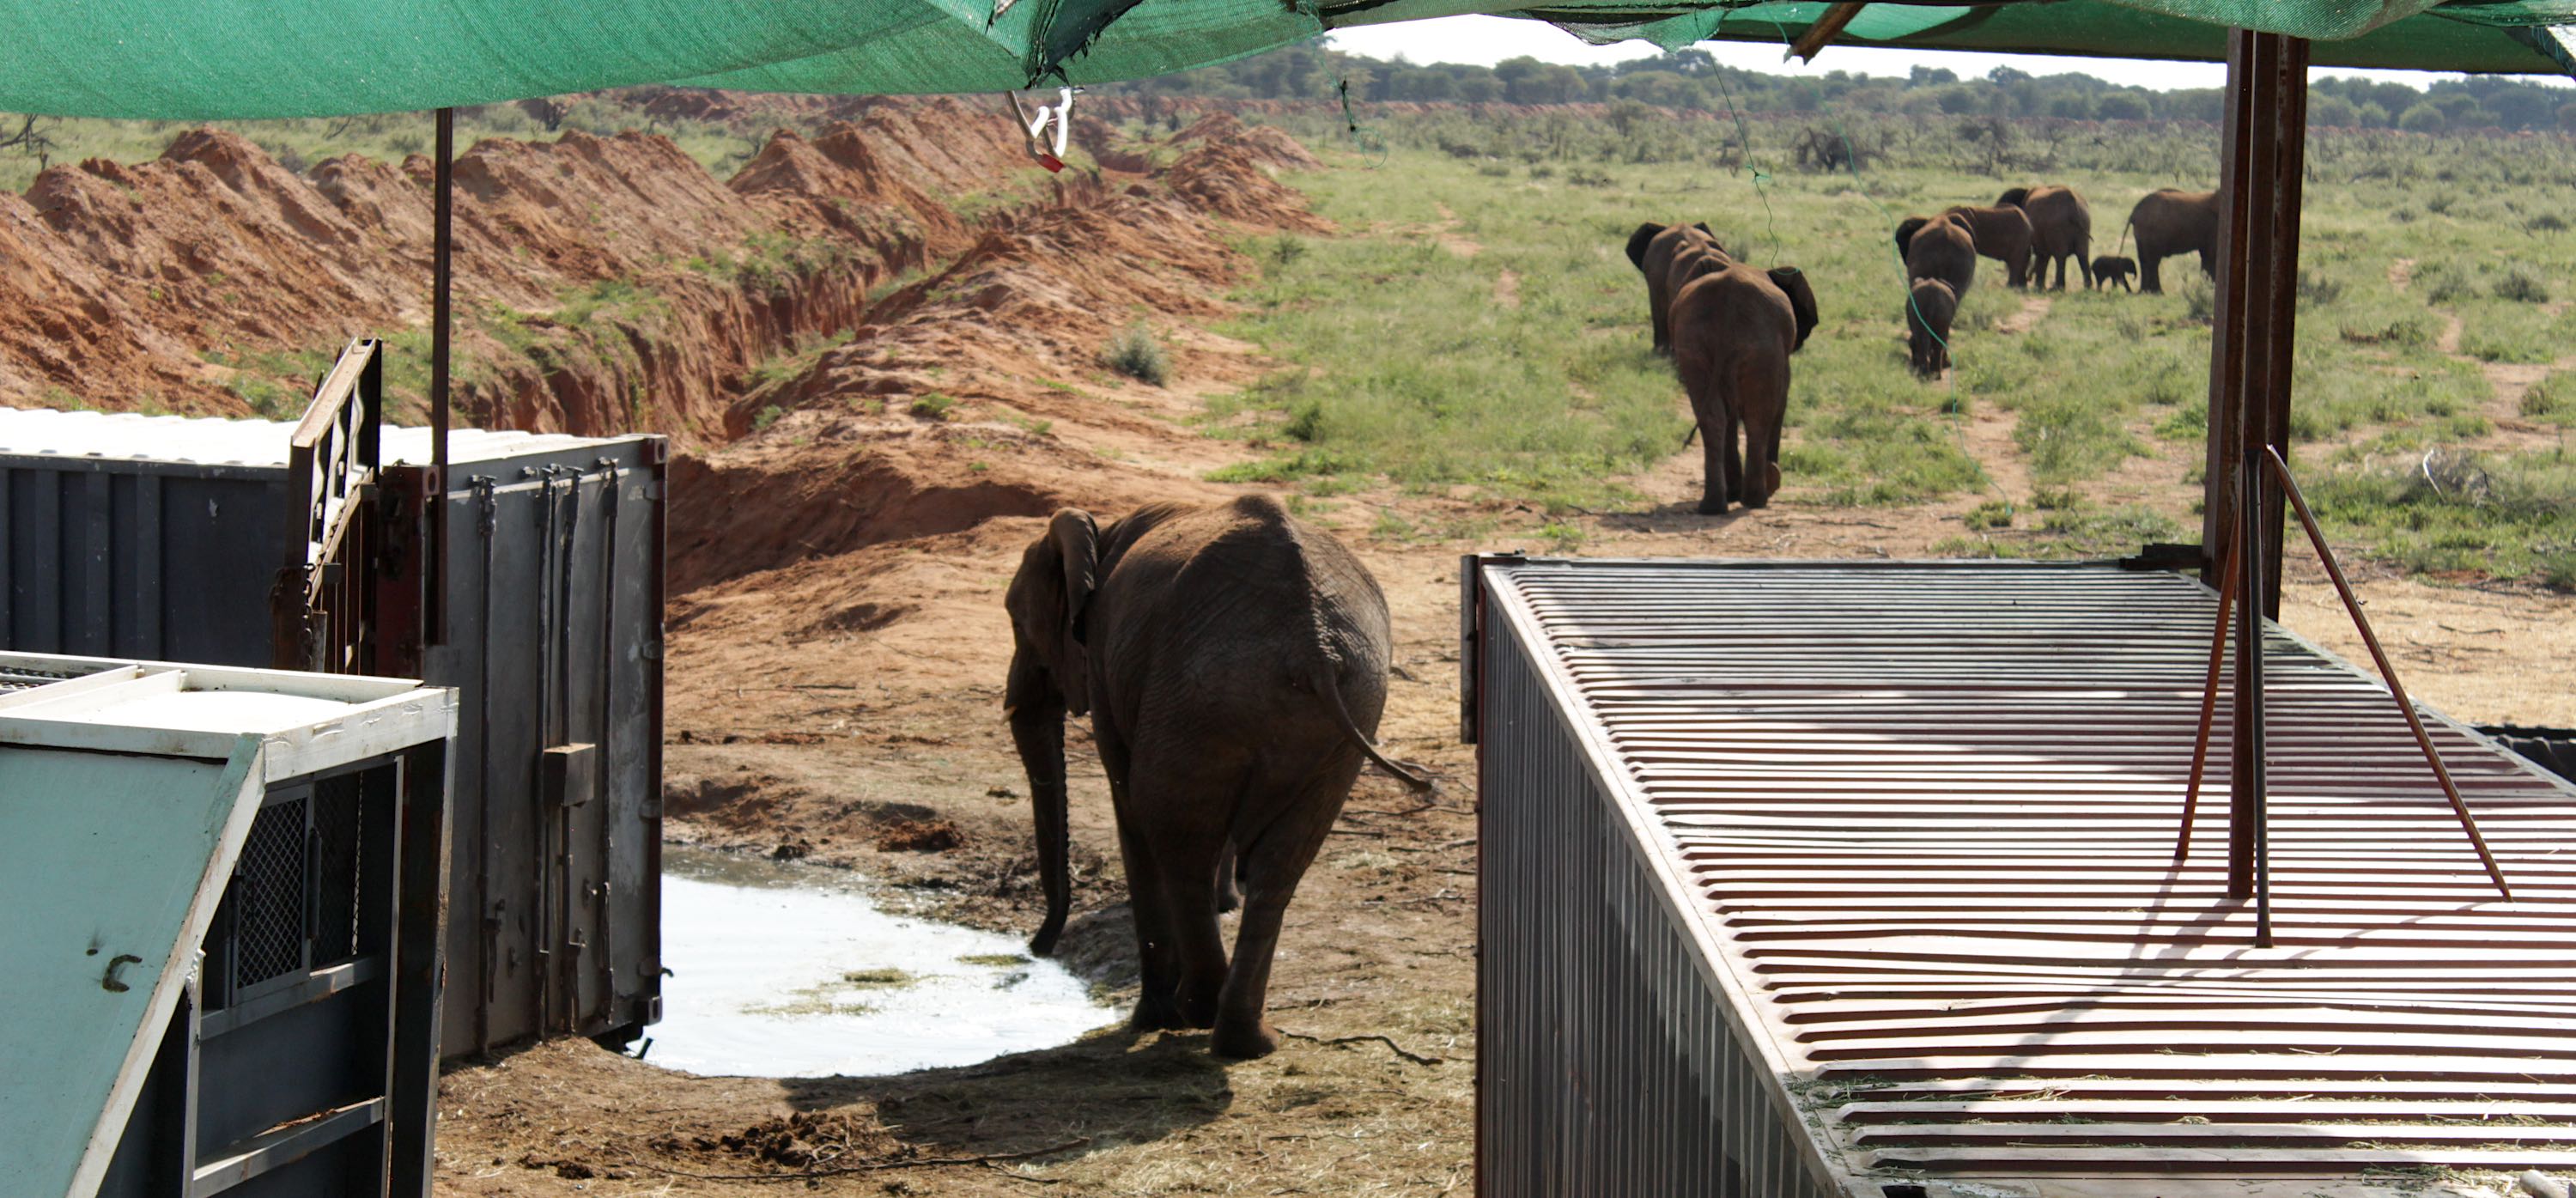 A group of elephants walk away from several shipping shipping containers with shade cloth netting above.